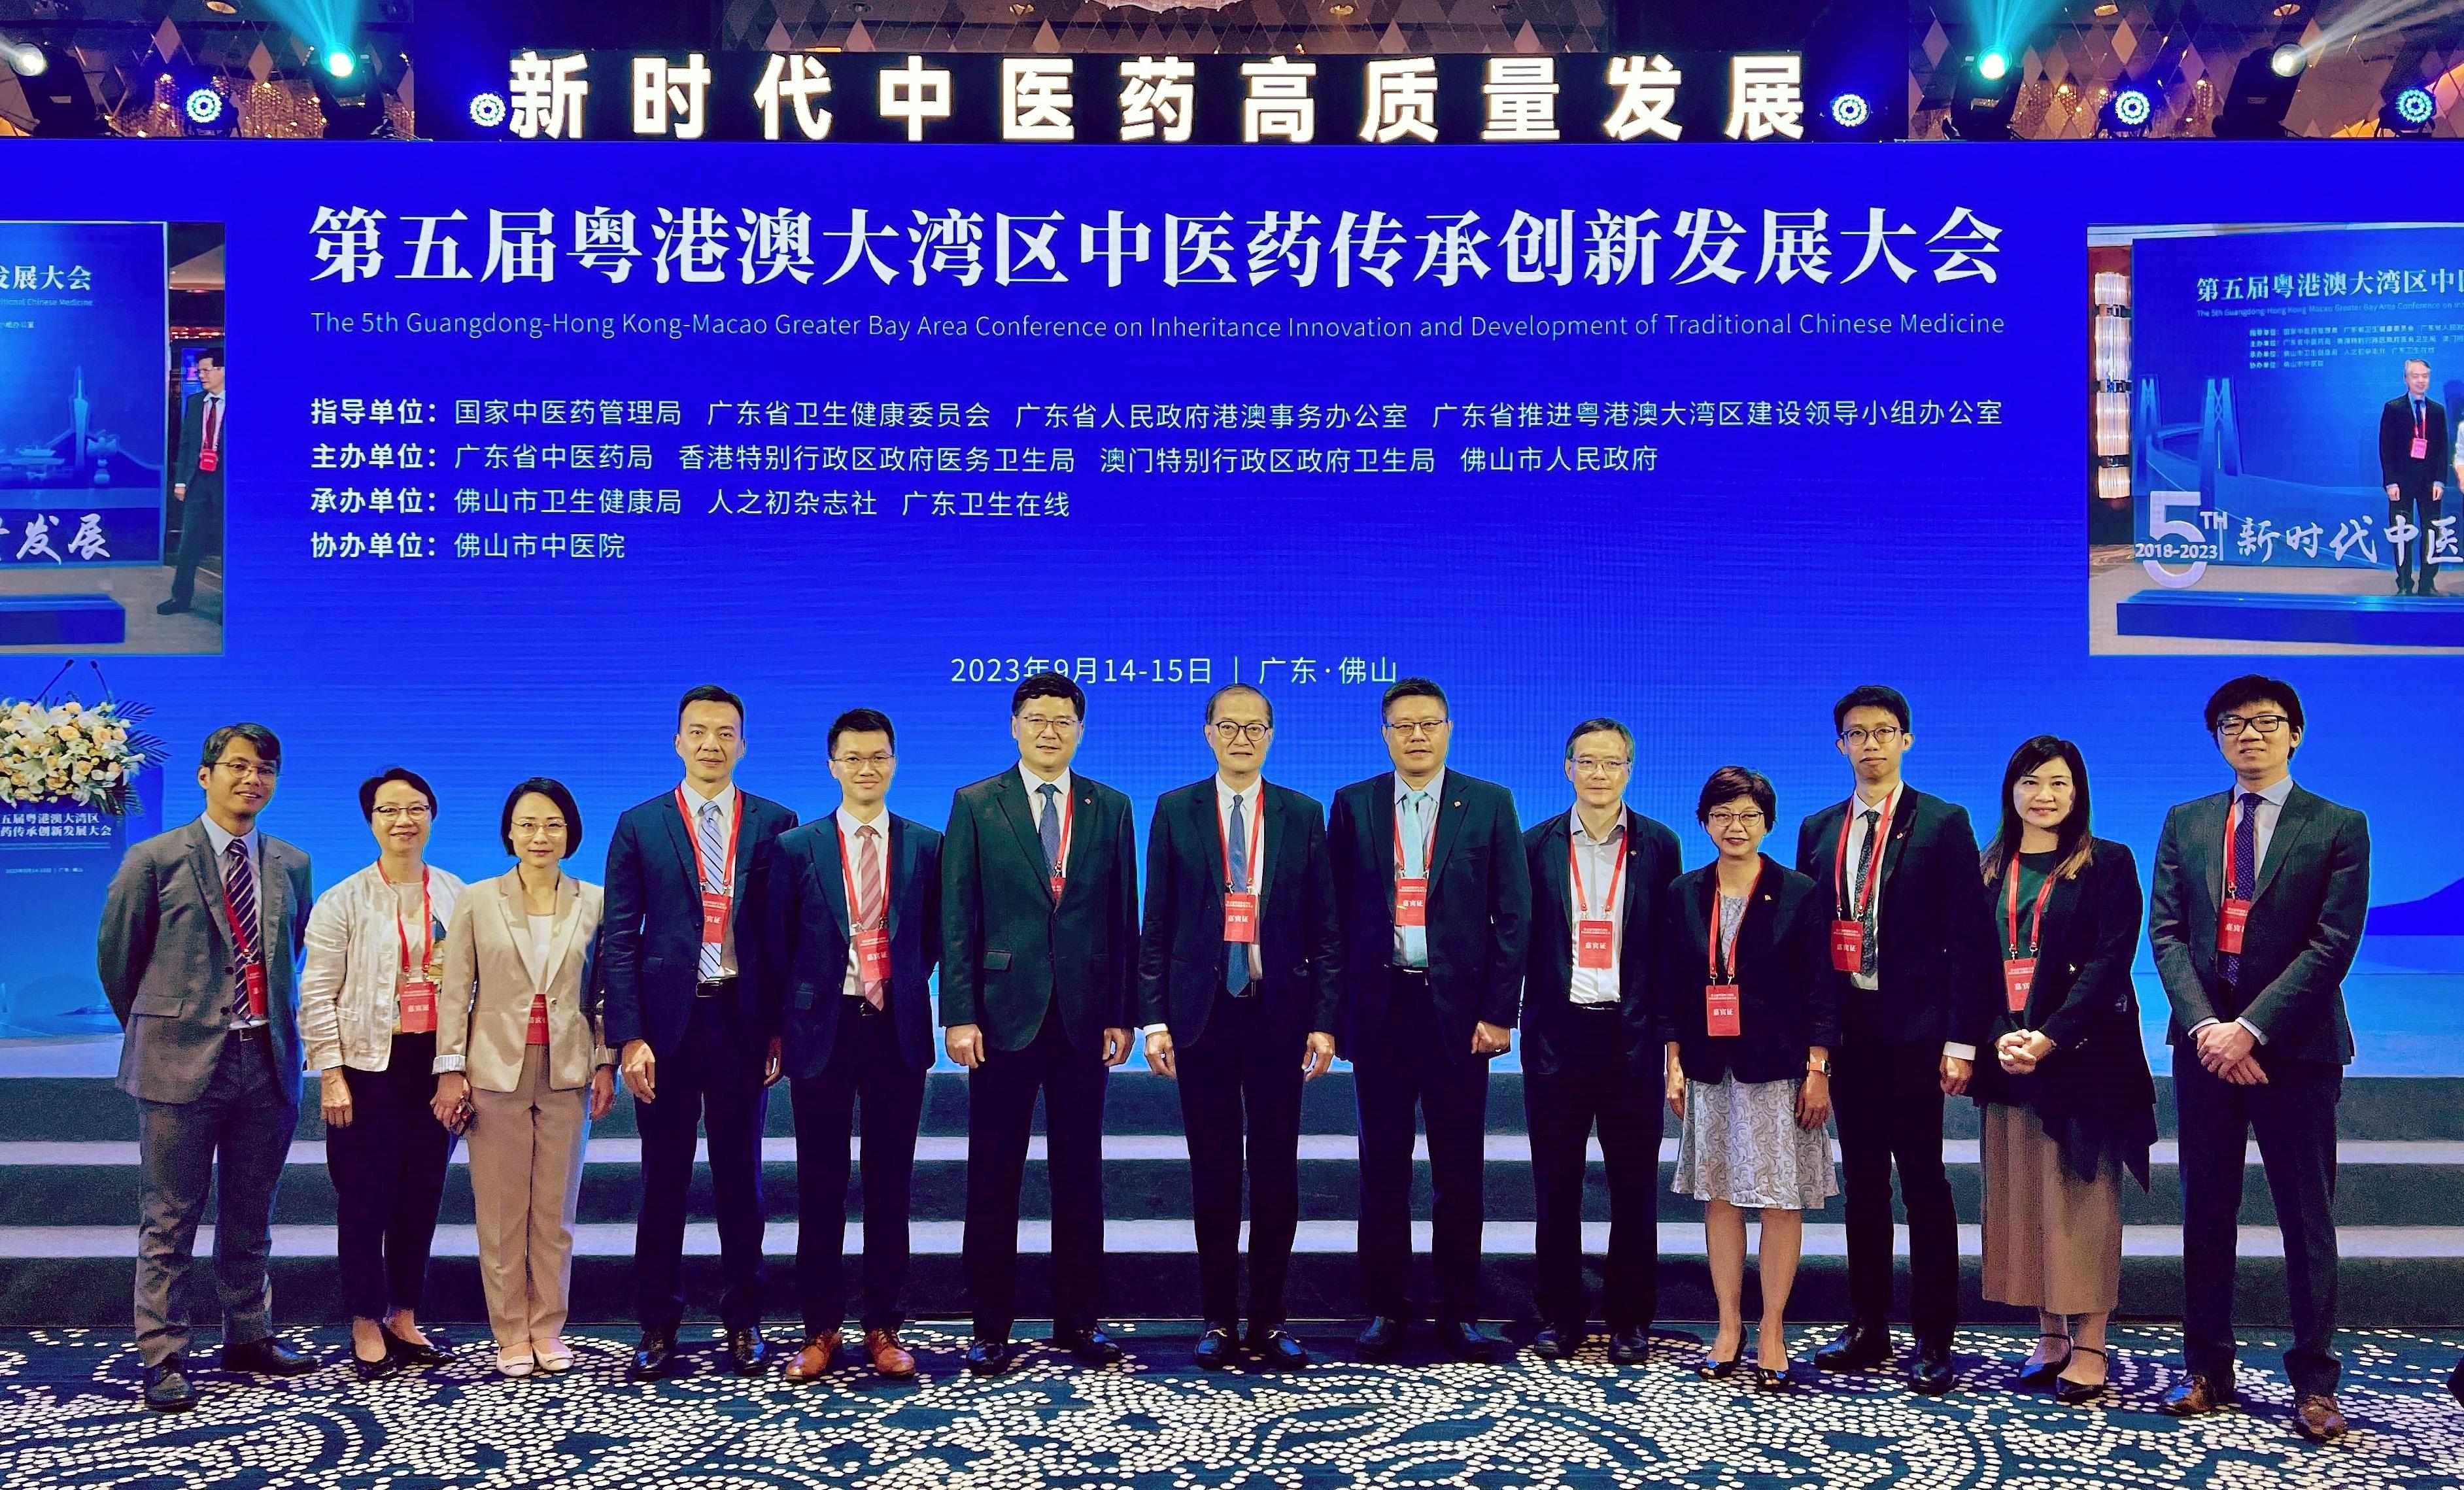 The Secretary for Health, Professor Lo Chung-mau (centre), attends the opening ceremony of the 5th Guangdong-Hong Kong-Macao Greater Bay Area Conference on Inheritance, Innovation and Development of Traditional Chinese Medicine together with officials from the Health Bureau (HHB), the Department of Health and the Hospital Authority (HA) in Foshan today (September 14). Next to him are the Chief Executive of the HA, Dr Tony Ko (sixth left); the Acting Project Director of the Chinese Medicine Hospital Project Office of the HHB, Ms Virginia Leung (third left); the Acting Commissioner for Chinese Medicine Development of the HHB, Mr Dominic Ho (fifth left); the Assistant Director of Health (Chinese Medicine), Dr Edmund Fong (fourth left); and the Chief Manager (Chinese Medicine) of the HA, Ms Rowena Wong (fourth right).